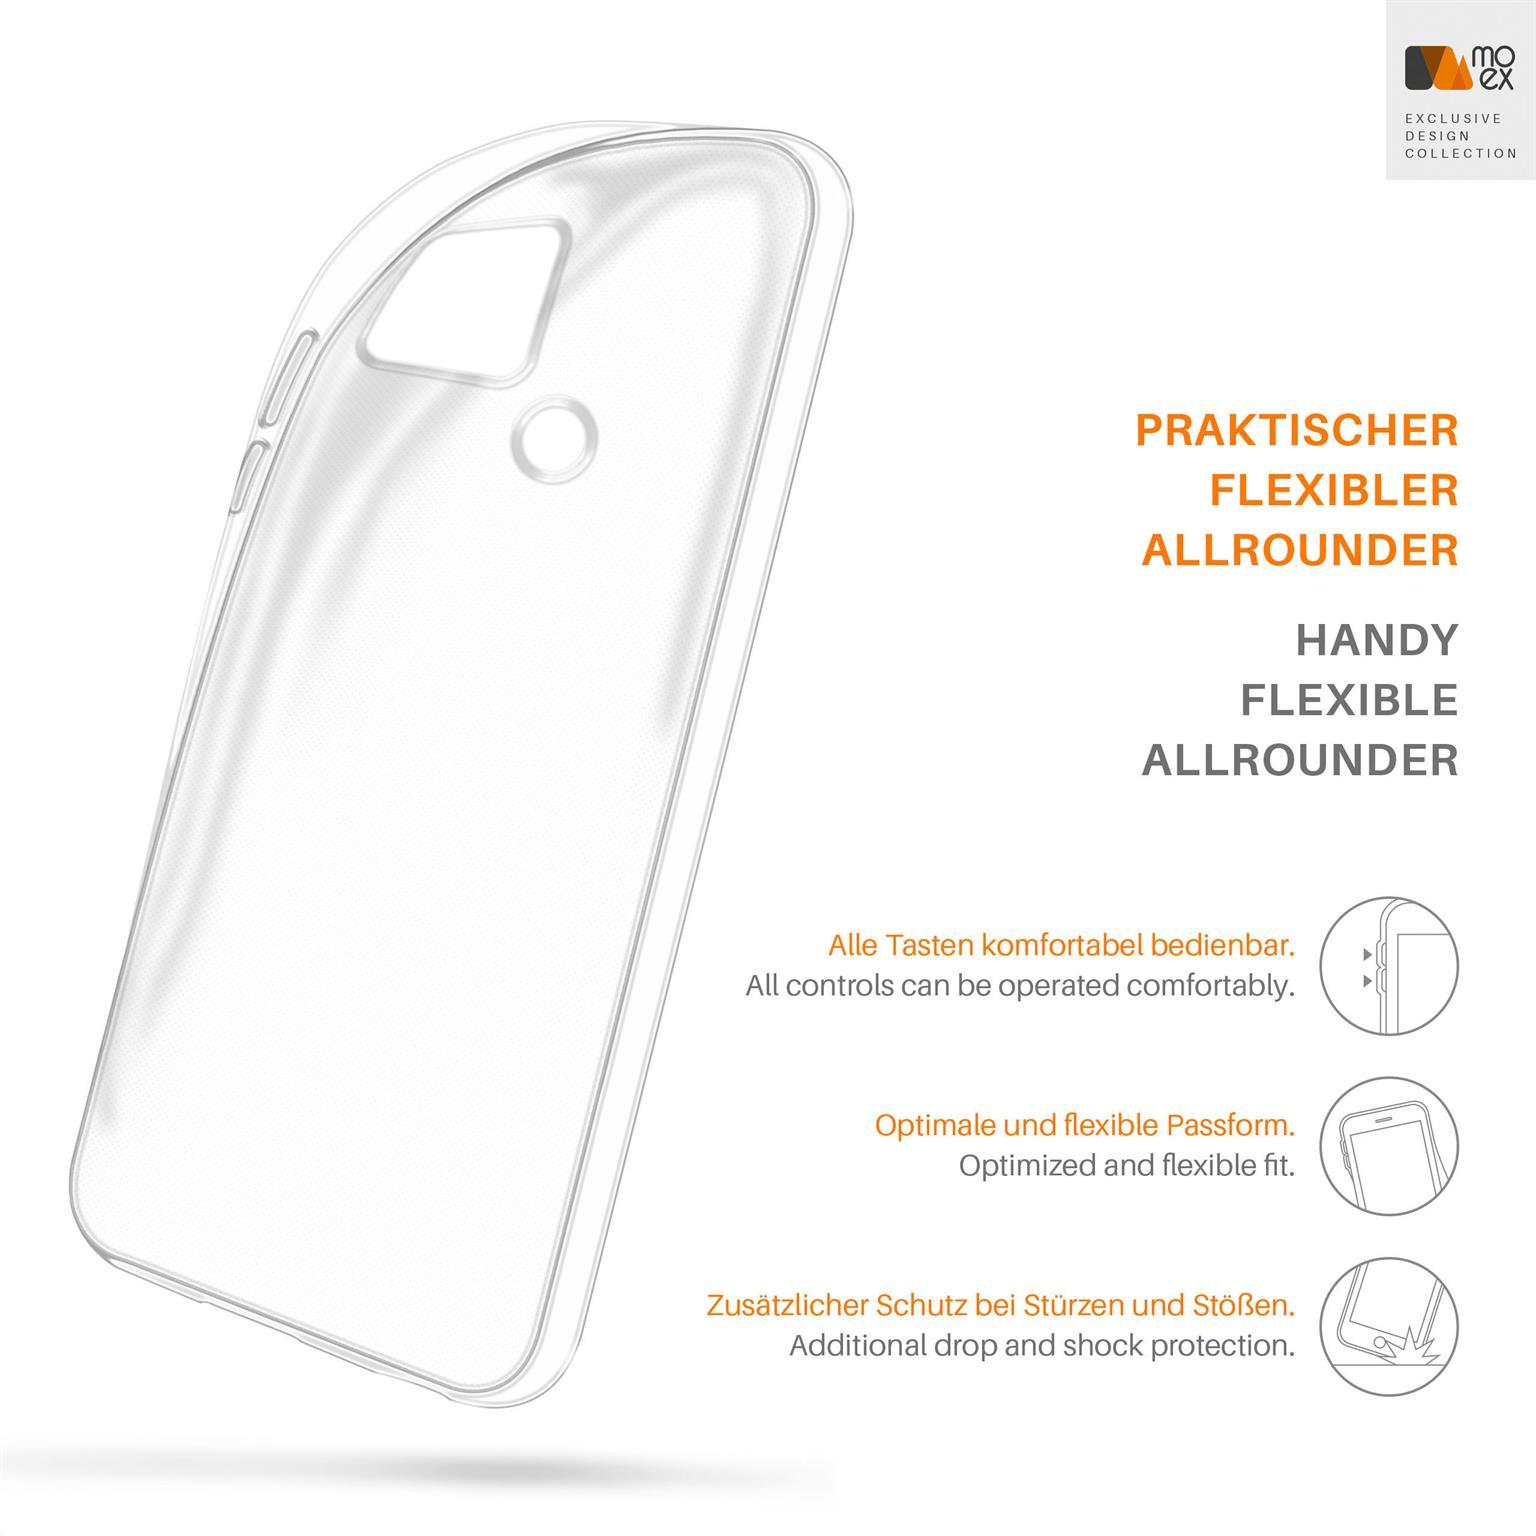 Case, MOEX Aero A15, Oppo, Backcover, Crystal-Clear